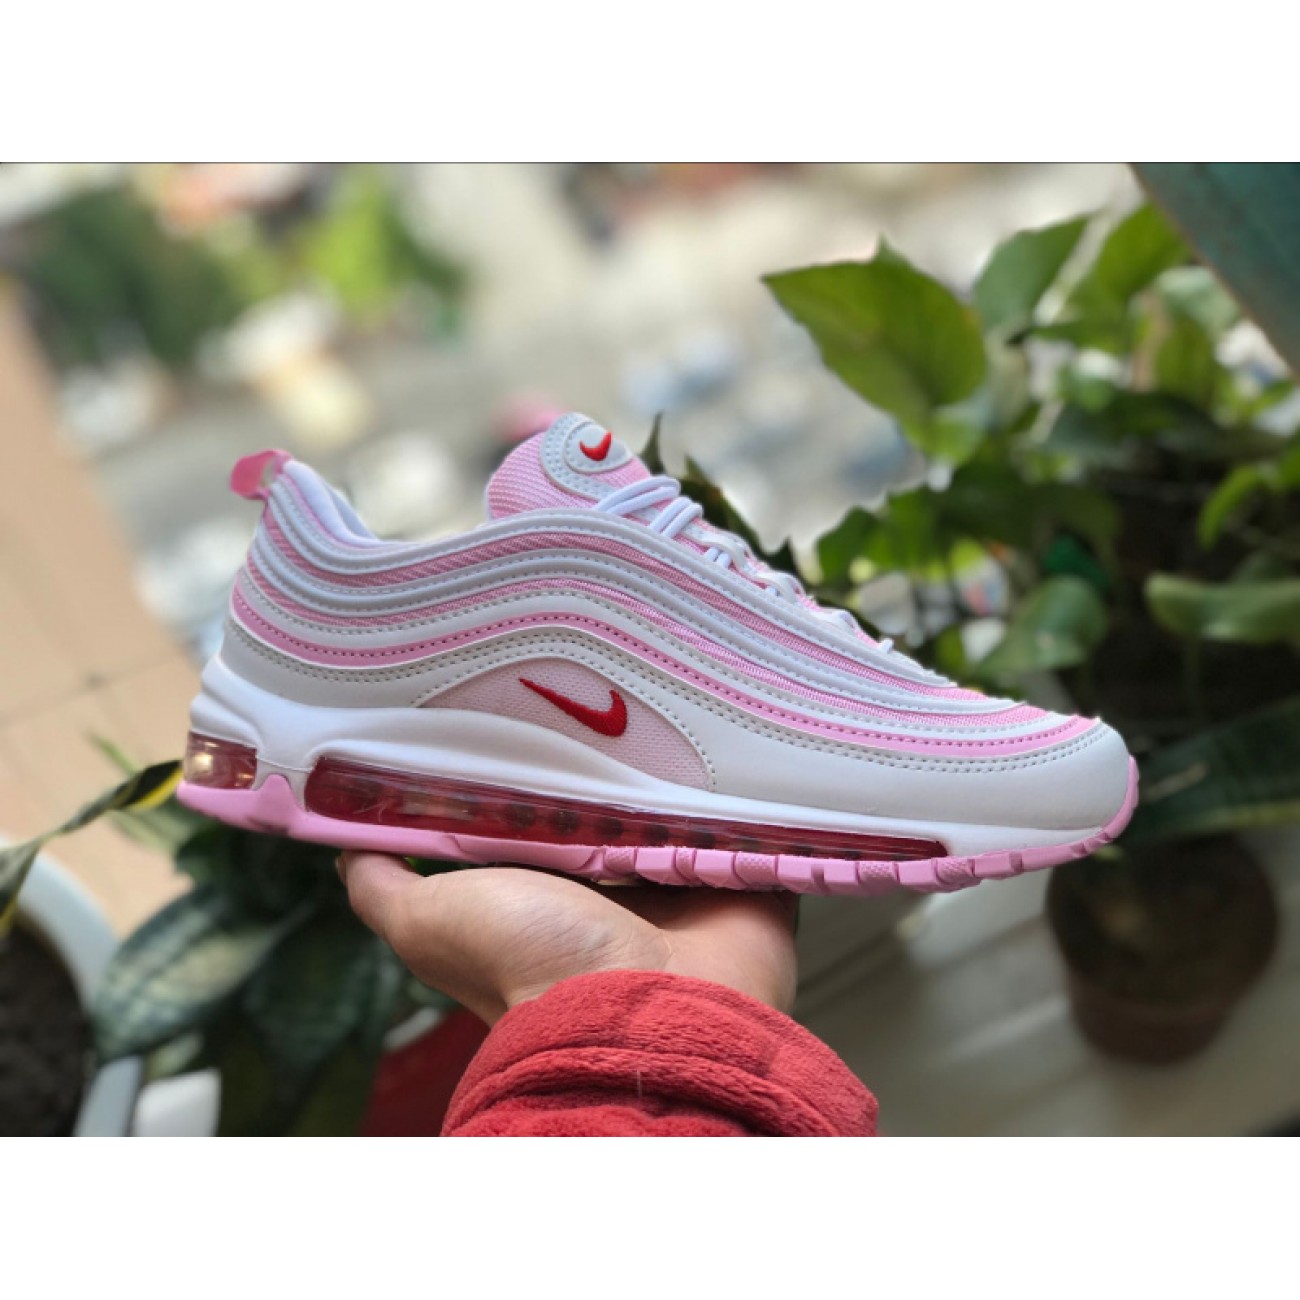 Wmns Nike Air Max 97 Durable Modeling Pink White 313054-161